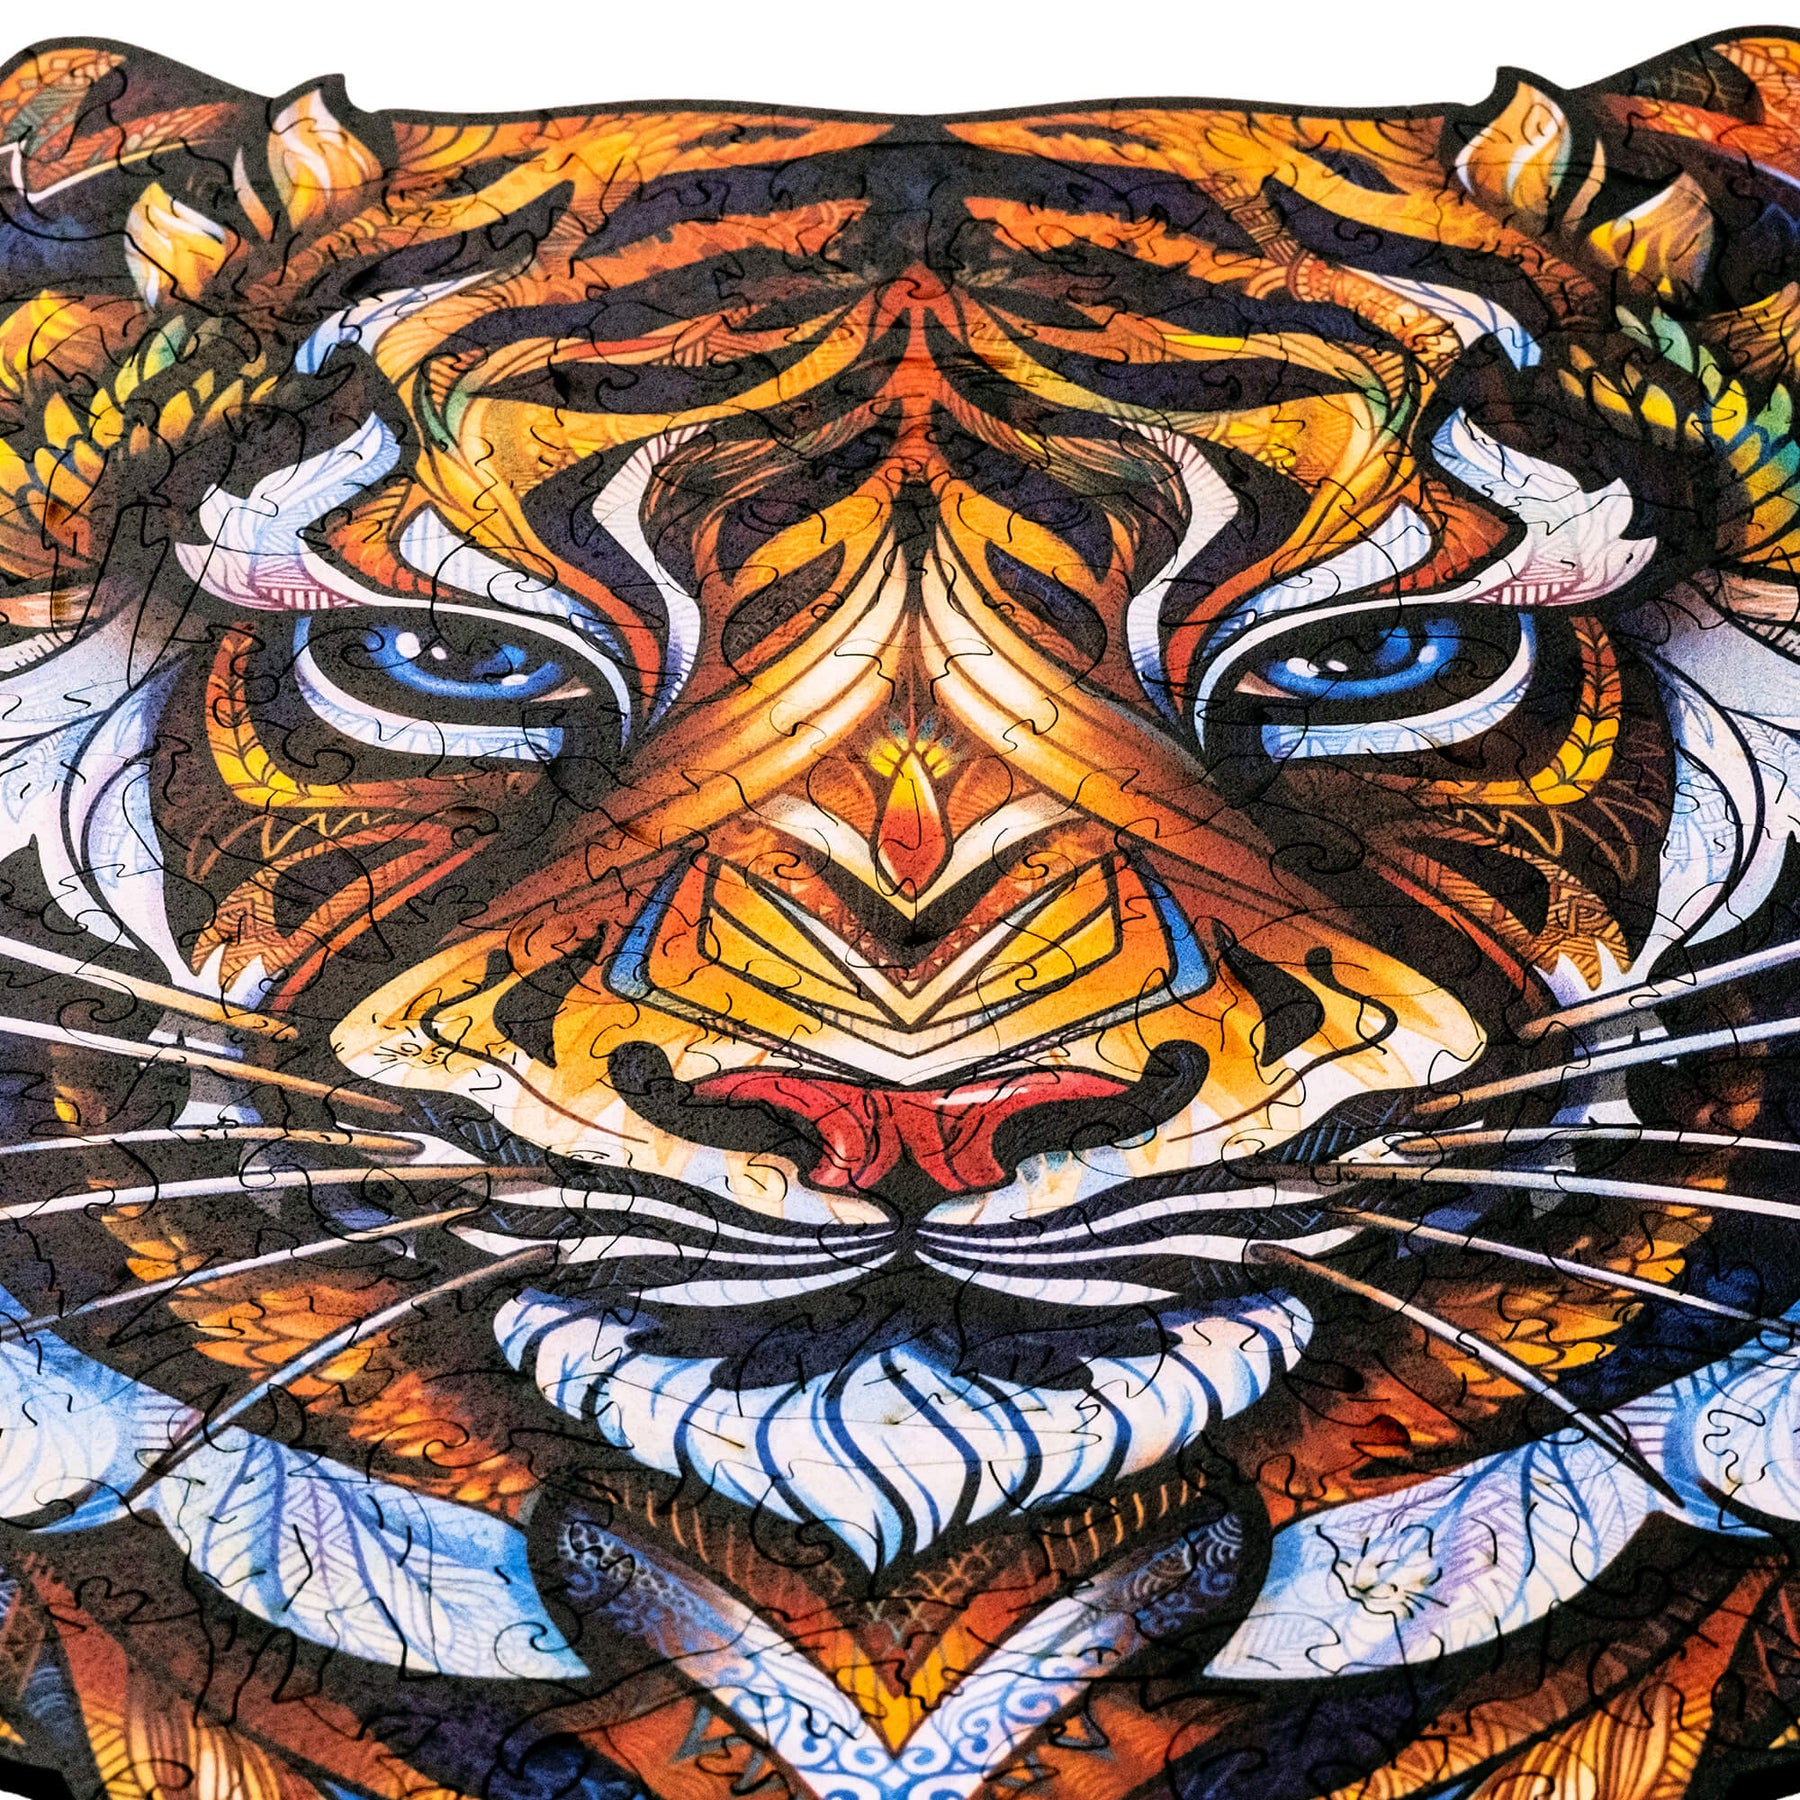 Lovely tiger wooden puzzle unidragon--